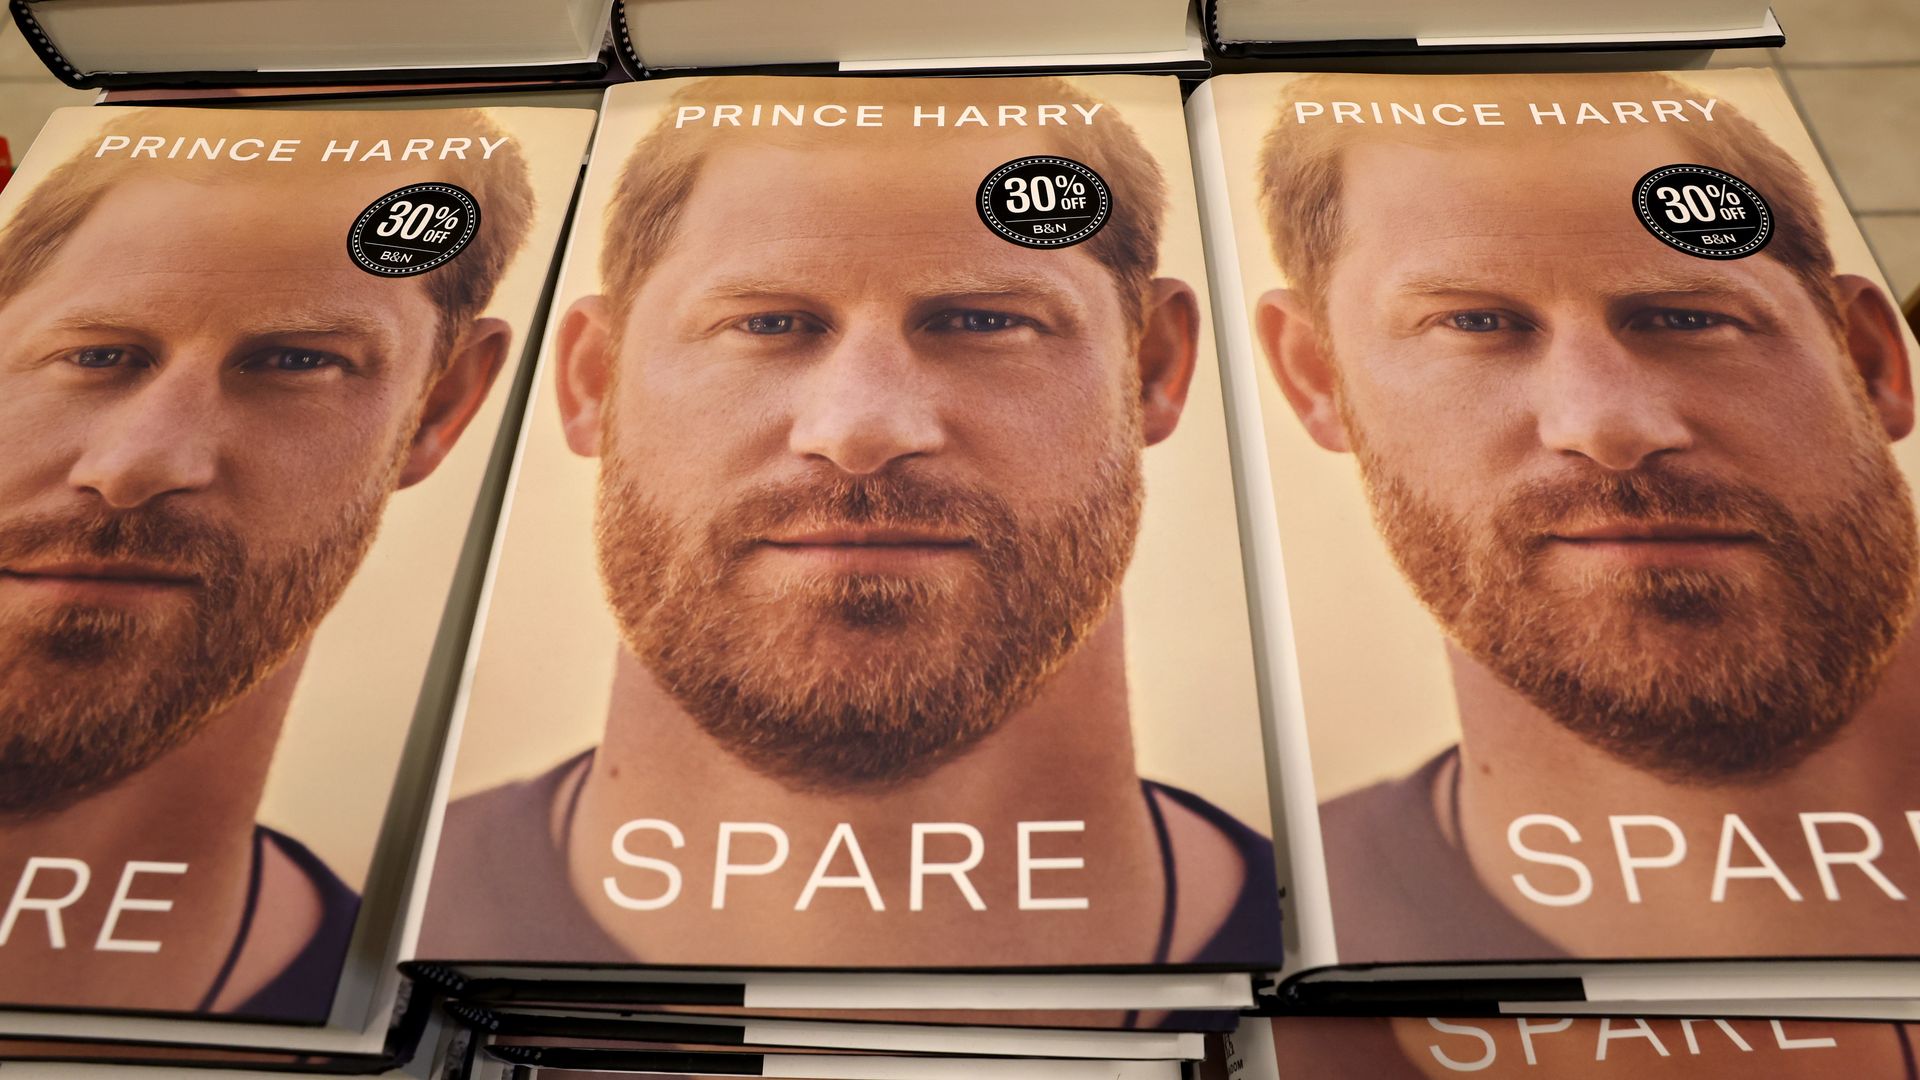  Prince Harry's memoir Spare is offered for sale at a Barnes & Noble store on January 10, 2023 in Chicago, Illinois.